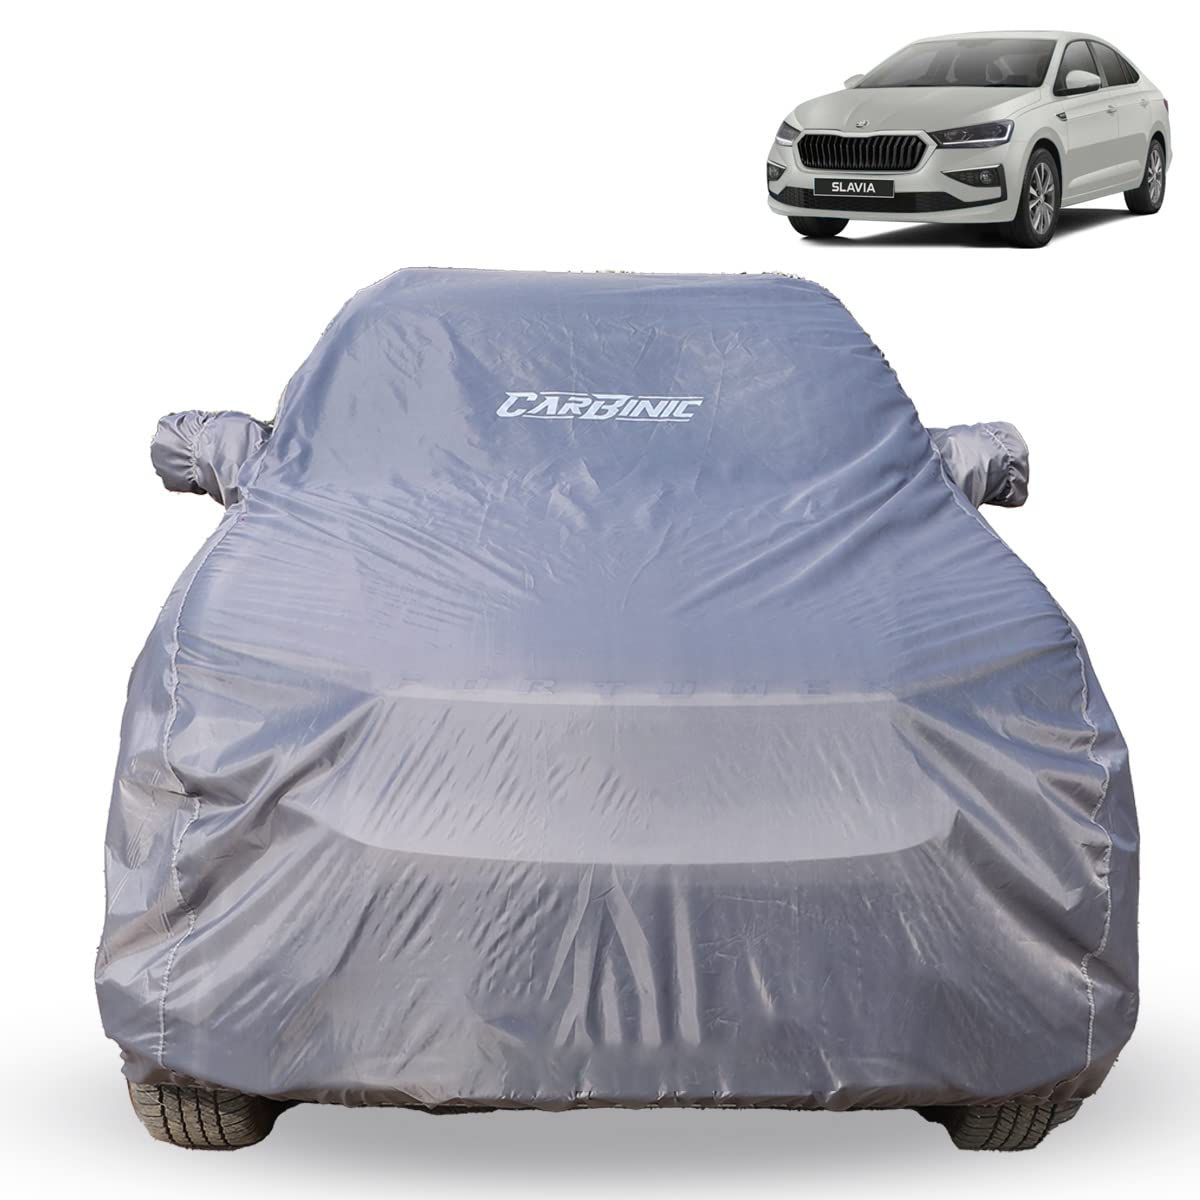 CARBINIC Car Body Cover for Skoda Slavia 2022 | Water Resistant, UV Protection Car Cover | Scratchproof Body Shield | Dustproof All-Weather Cover | Mirror Pocket & Antenna | Car Accessories, Grey